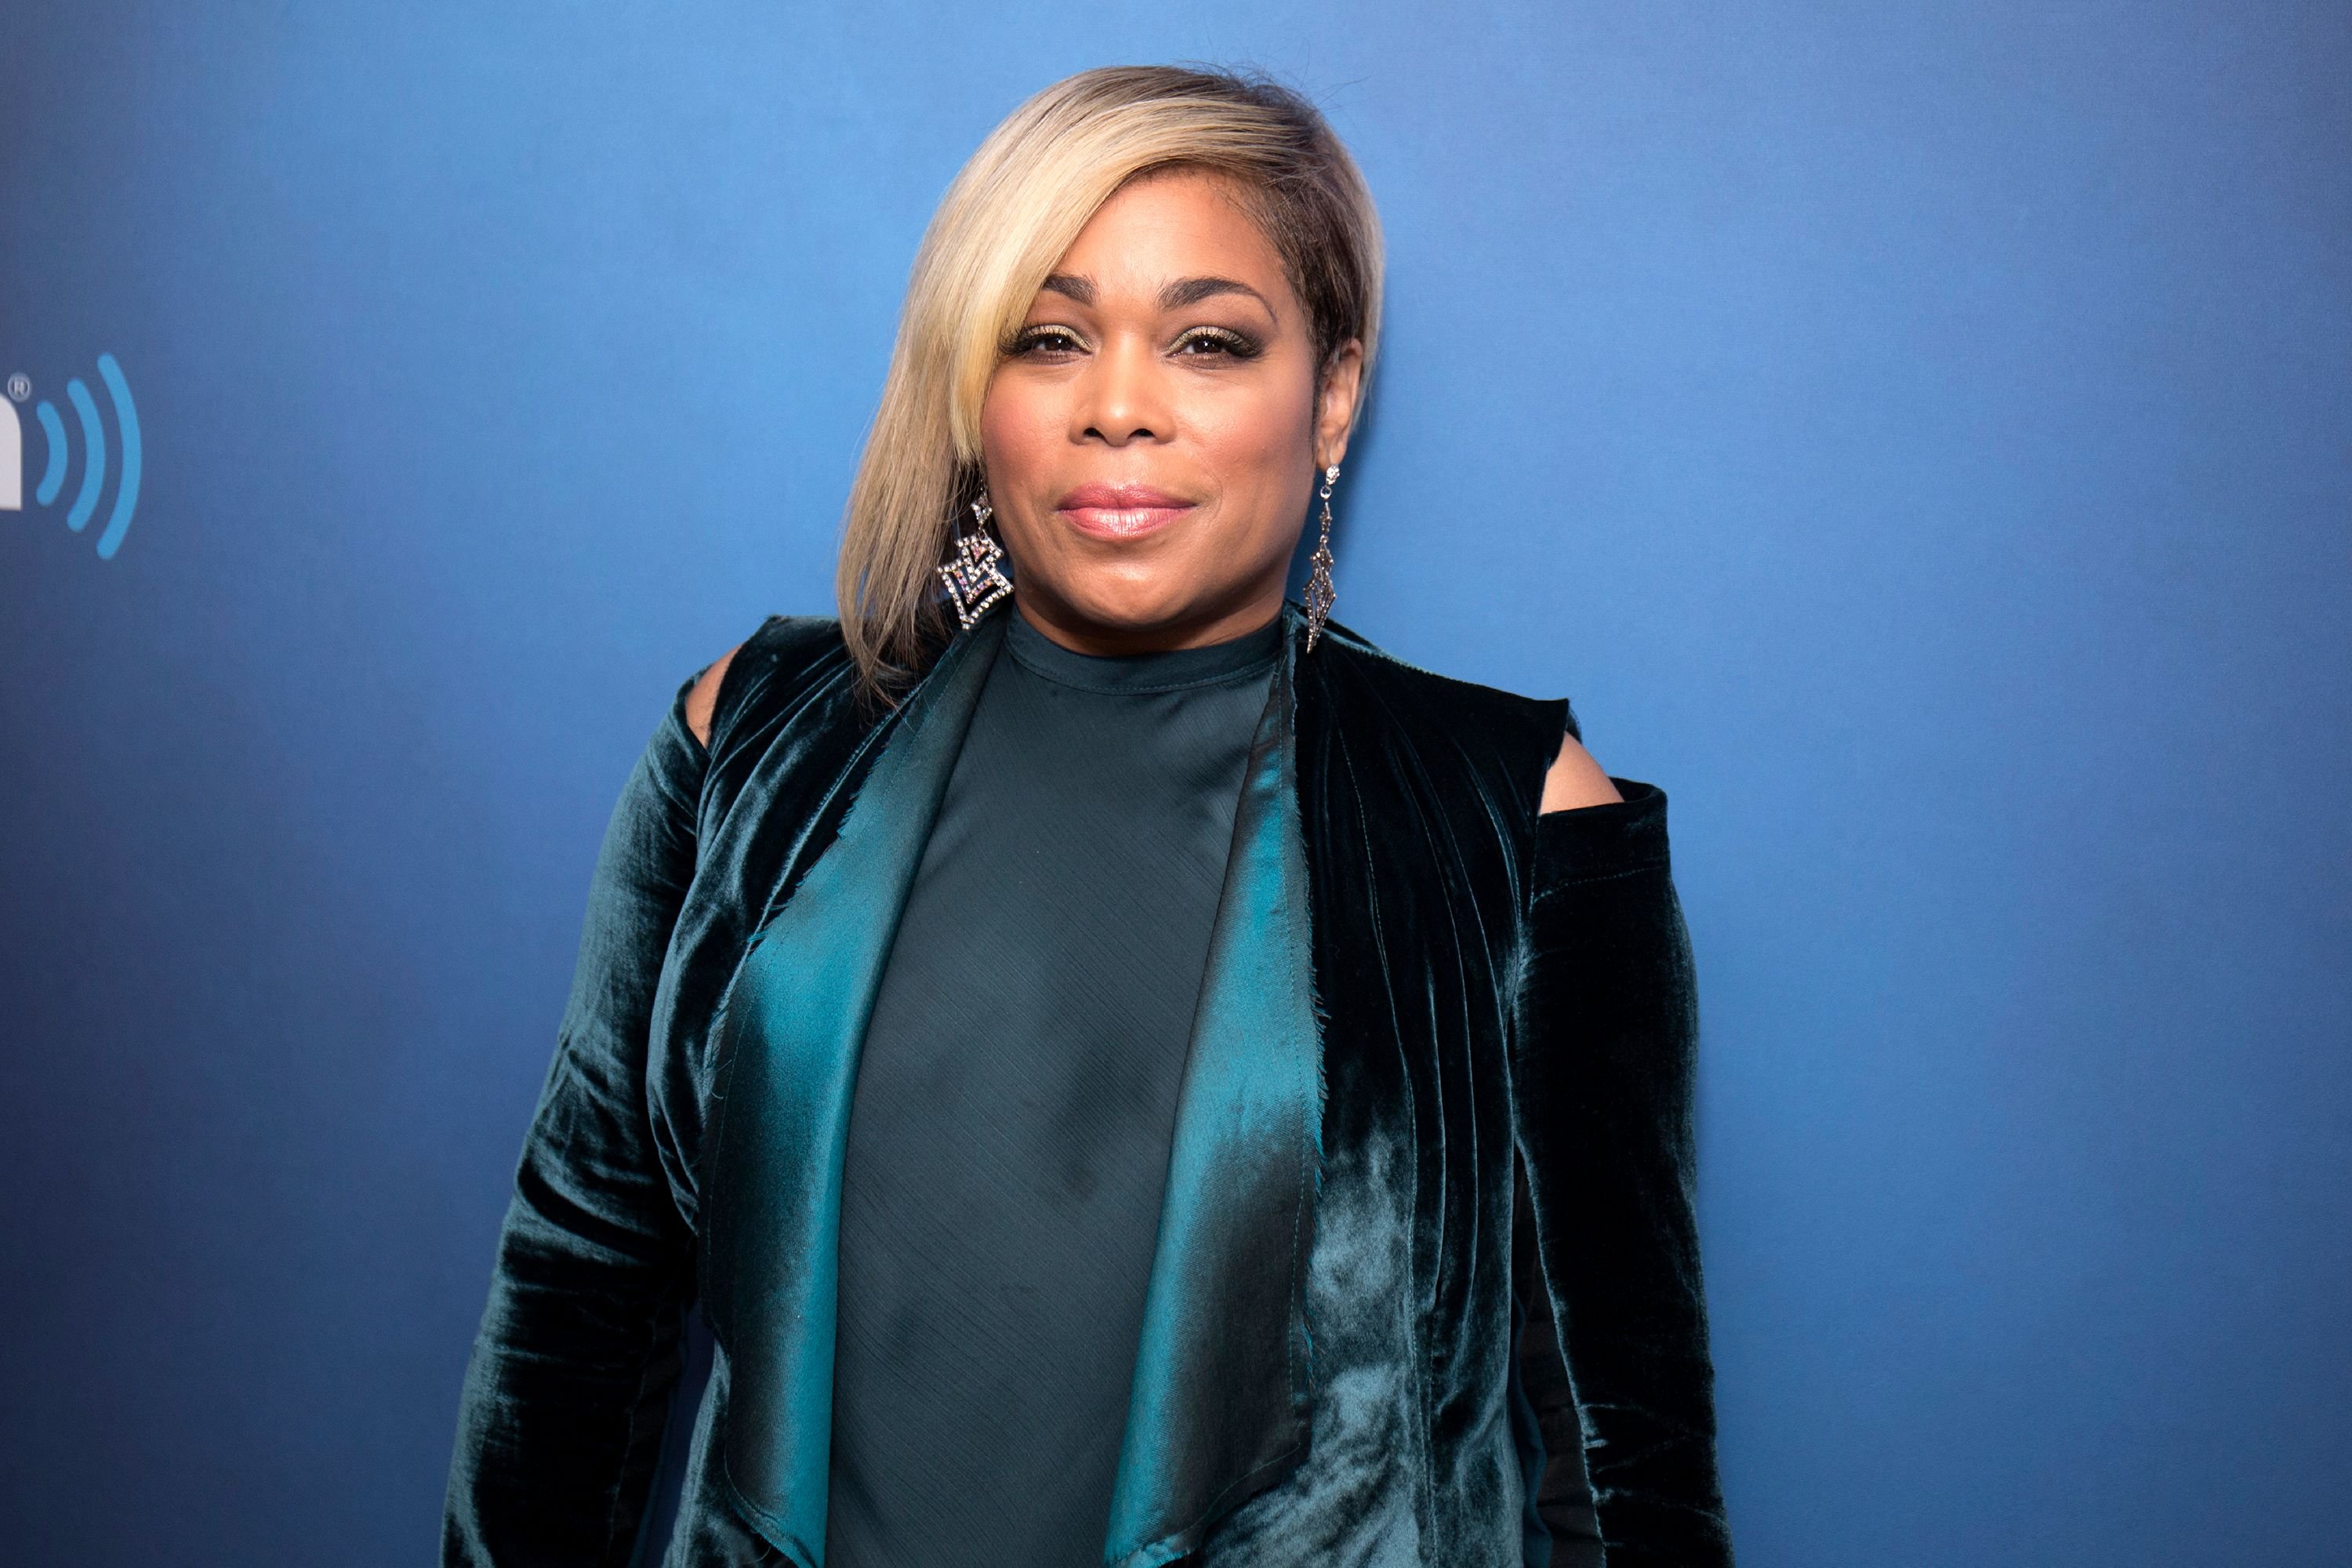 Tionne 'T-Boz' Watkins at SiriusXM Studios on September 12, 2017 in New York City | Photo: Getty Images